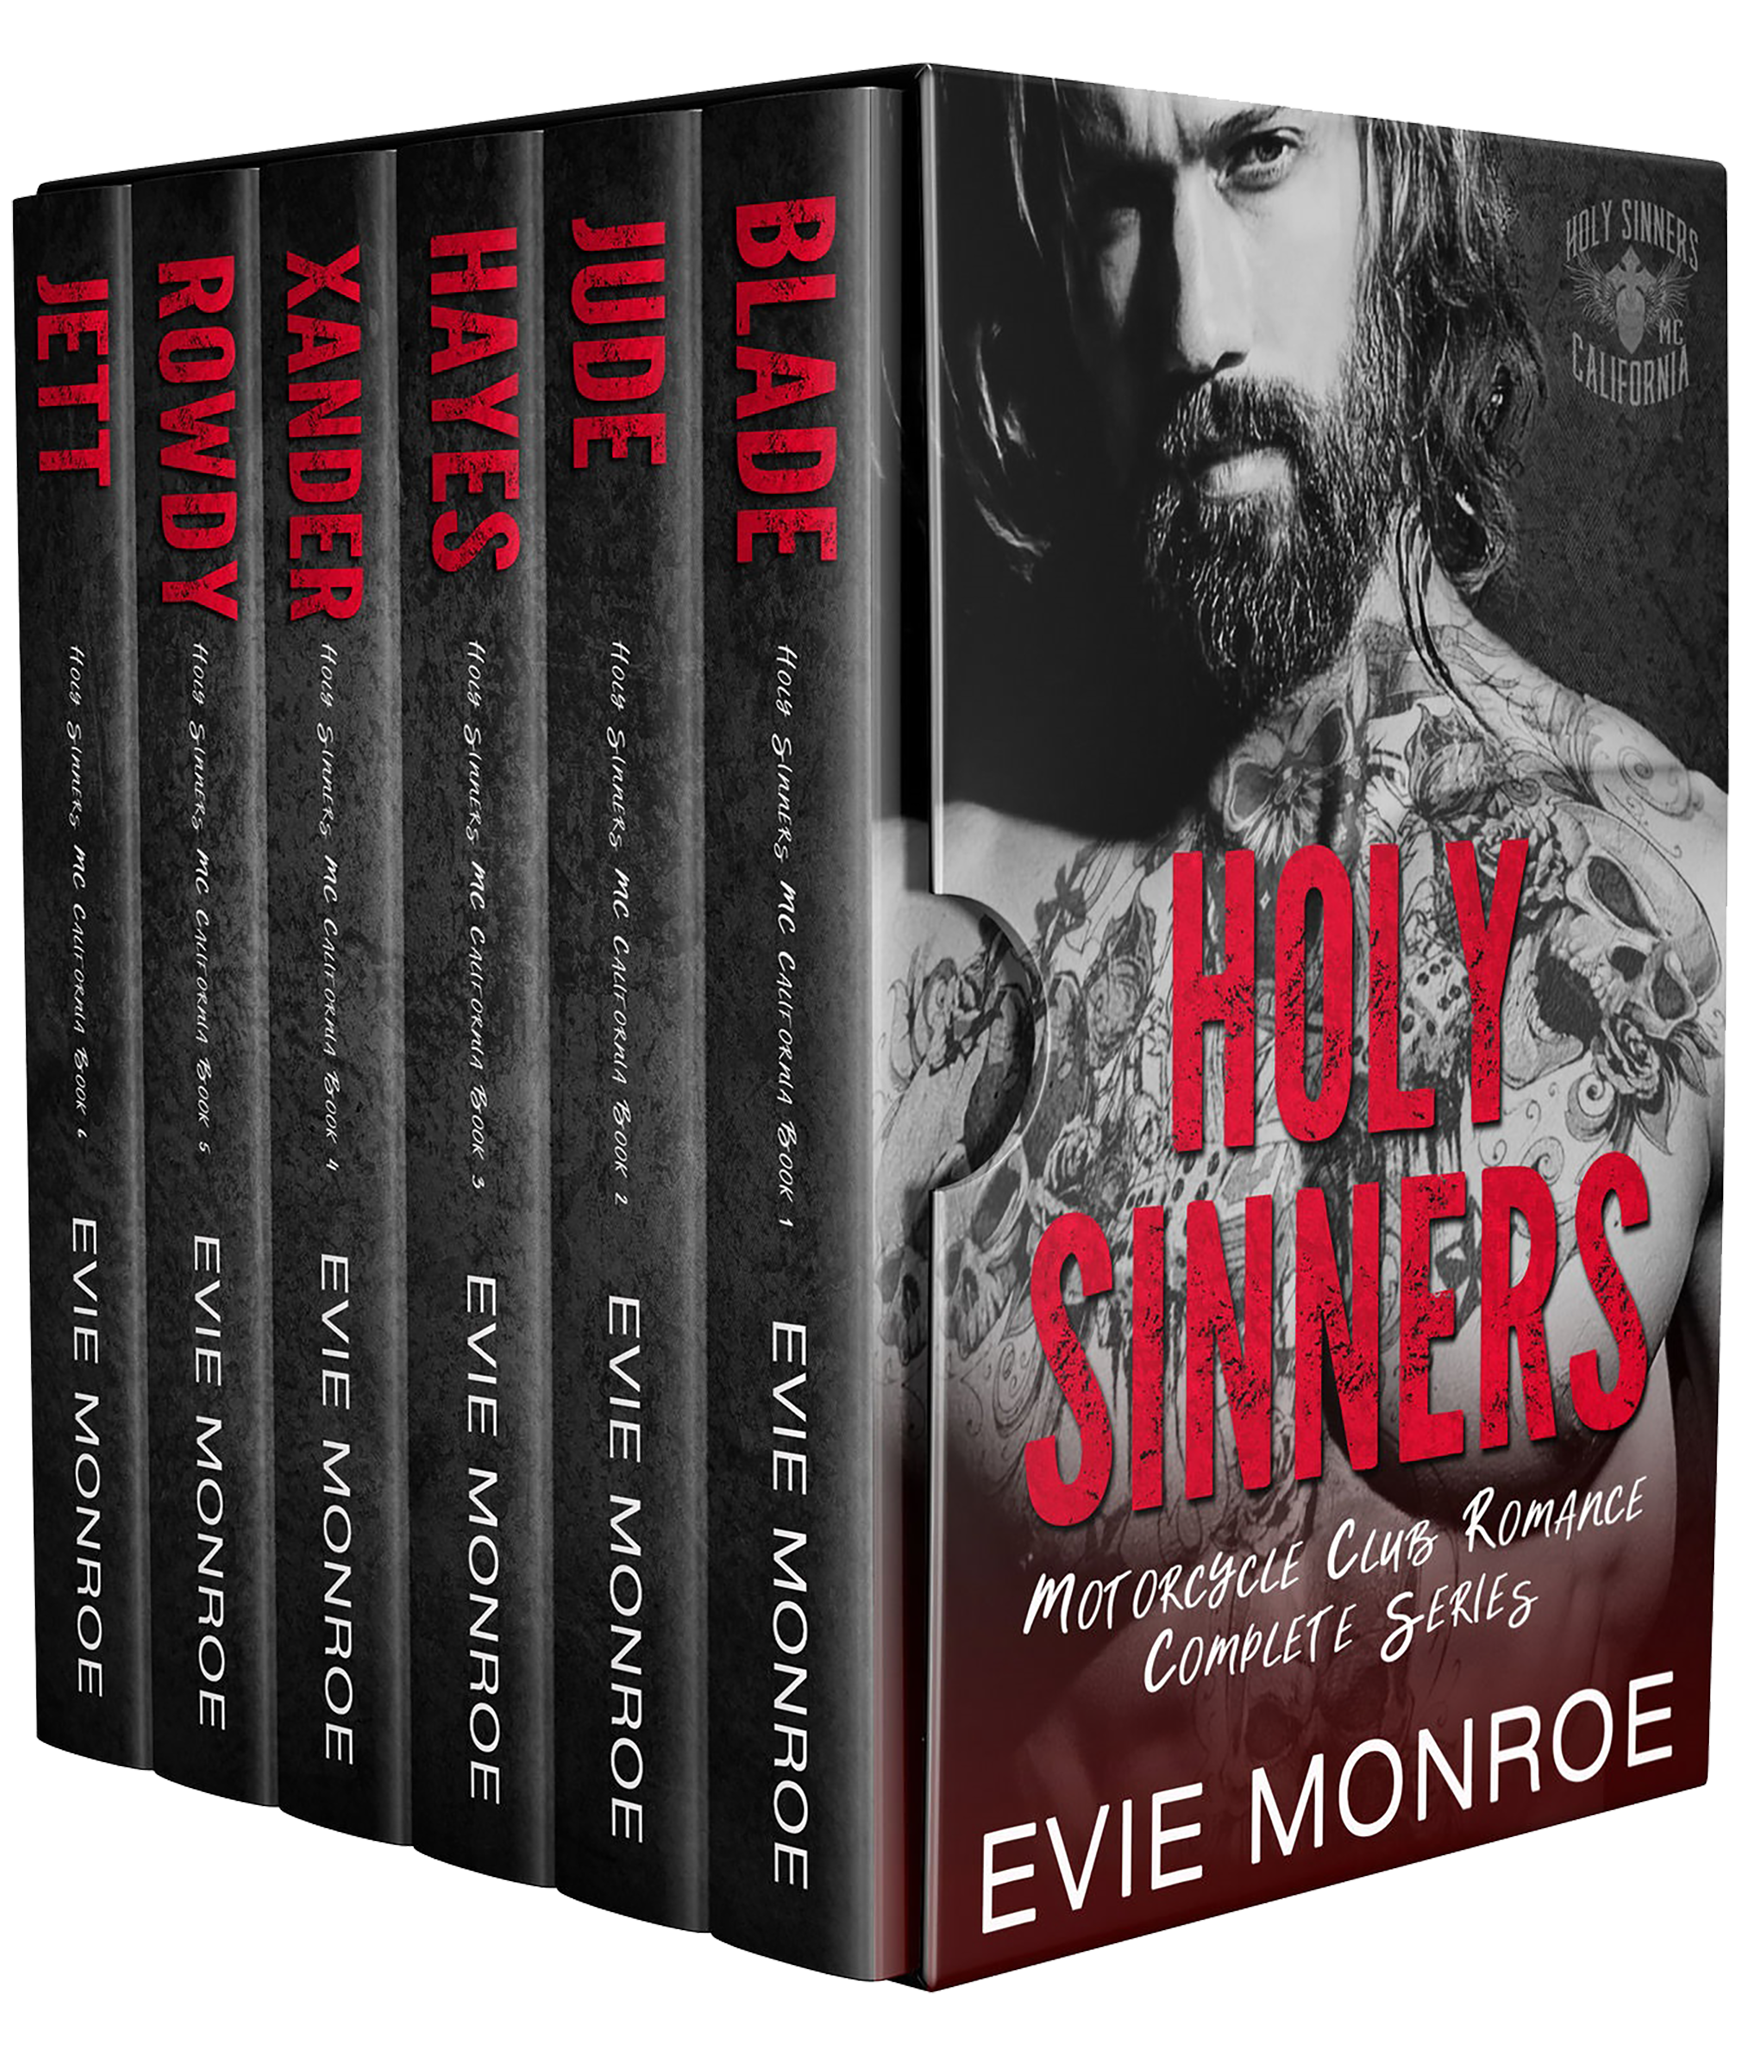 Holy Sinners MC Complete Series